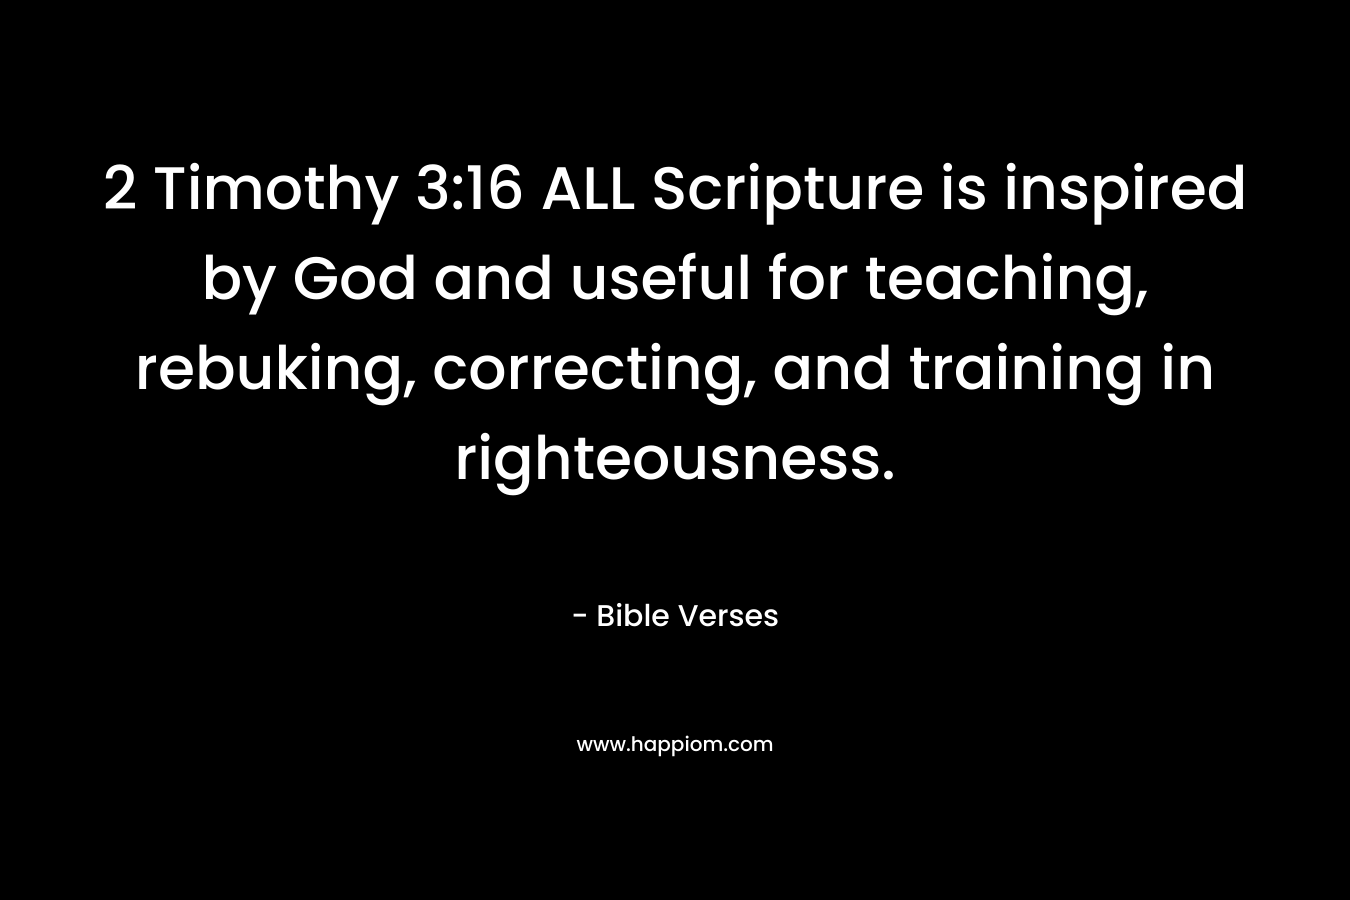 2 Timothy 3:16 ALL Scripture is inspired by God and useful for teaching, rebuking, correcting, and training in righteousness.